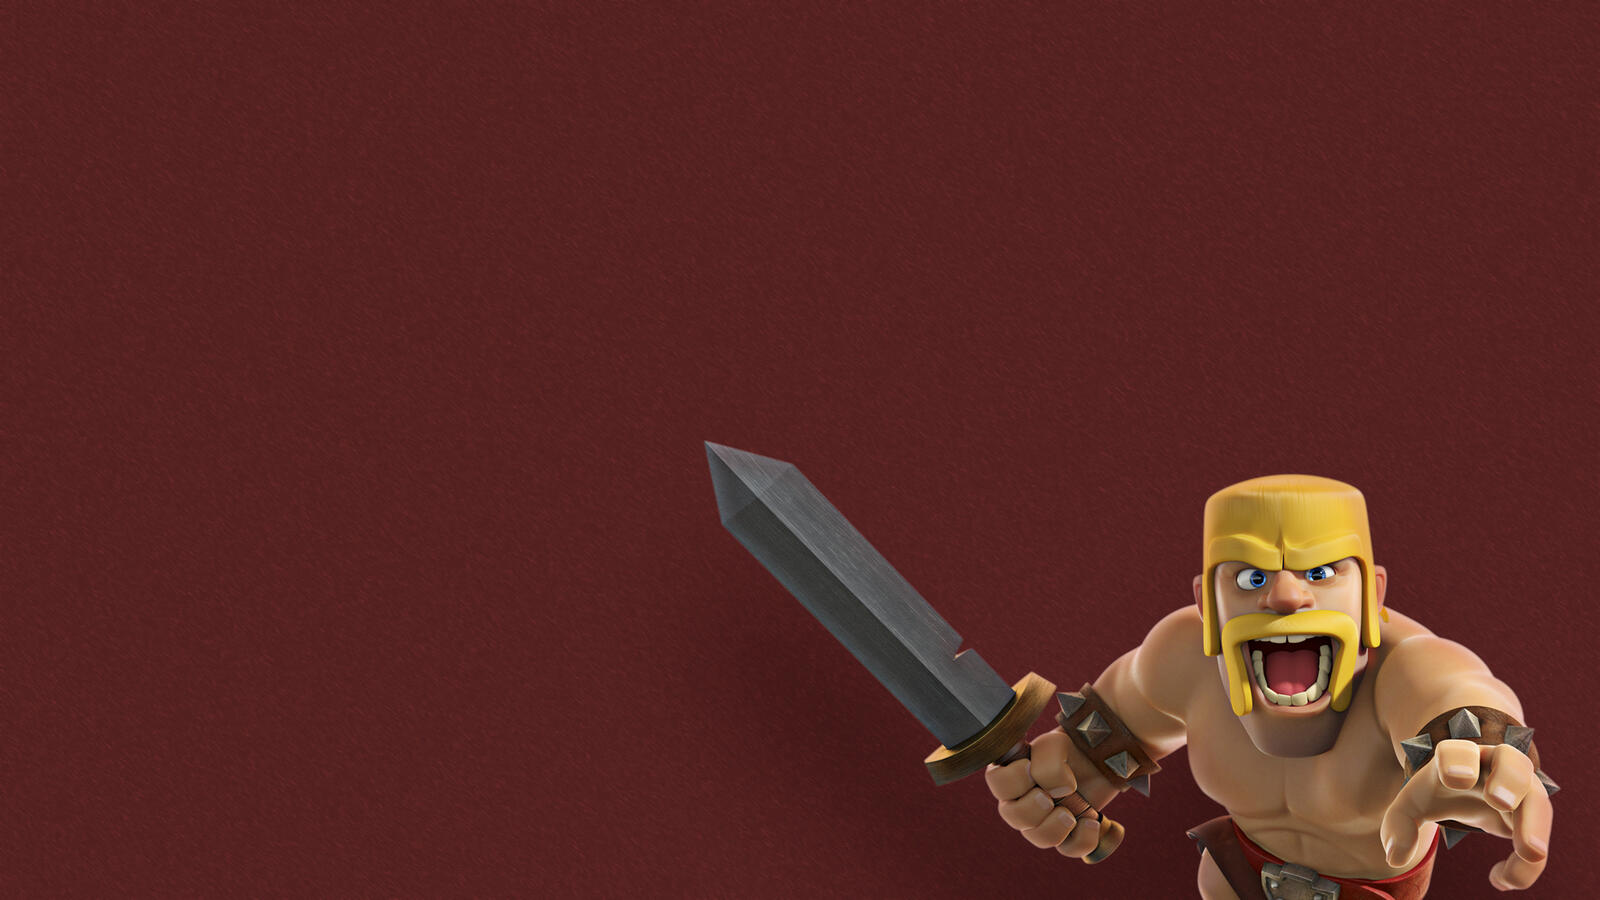 Wallpapers games Clash Of Clans barbarian on the desktop